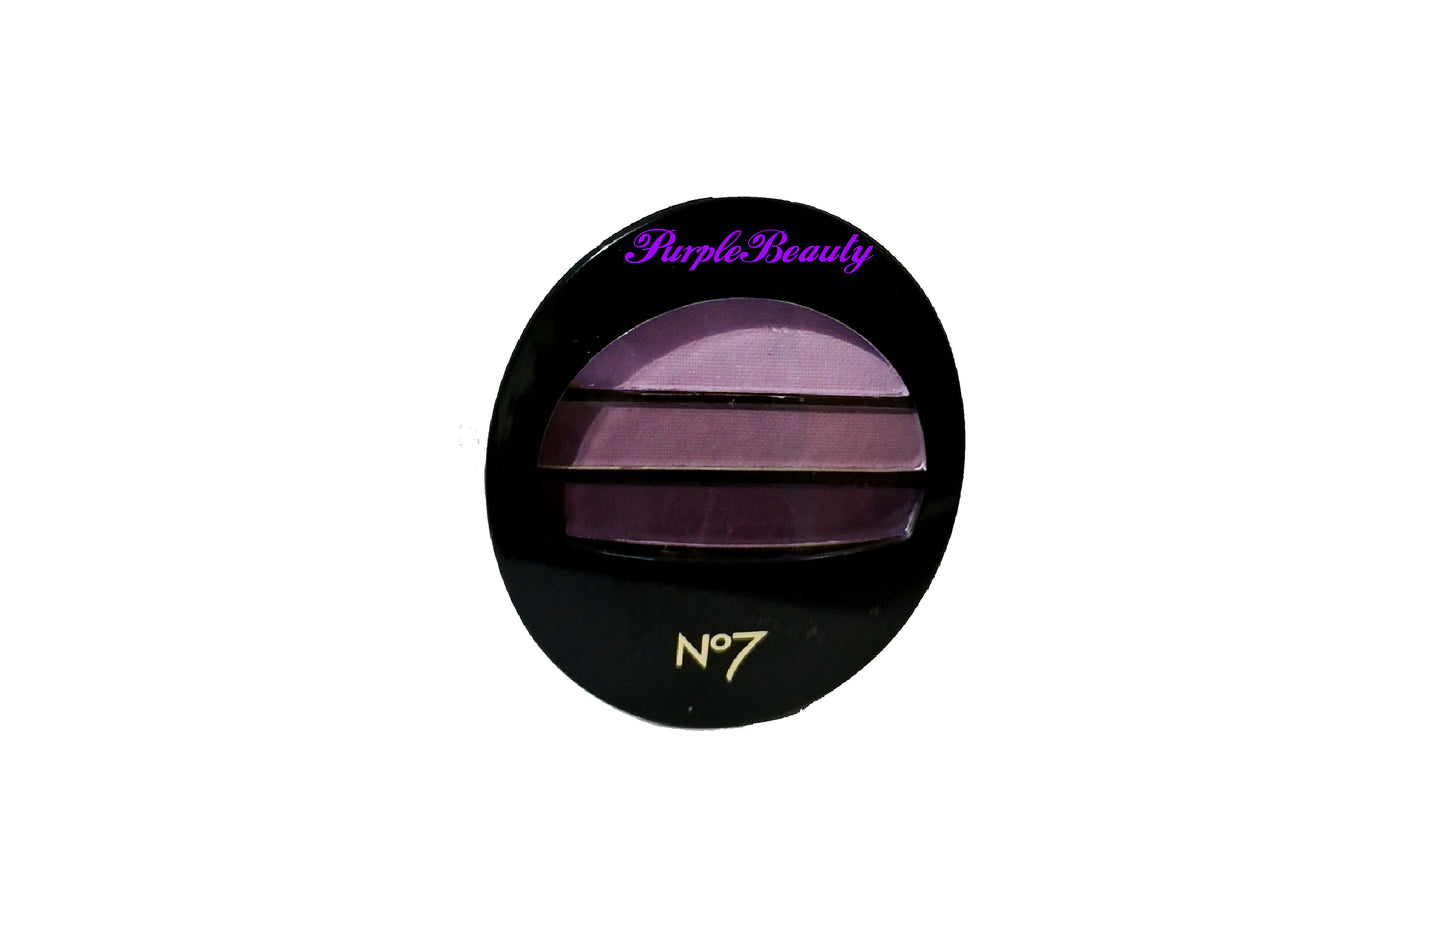 No7 Stay Perfect EyeShadow Trio Palette in Shades of Purple/Plum